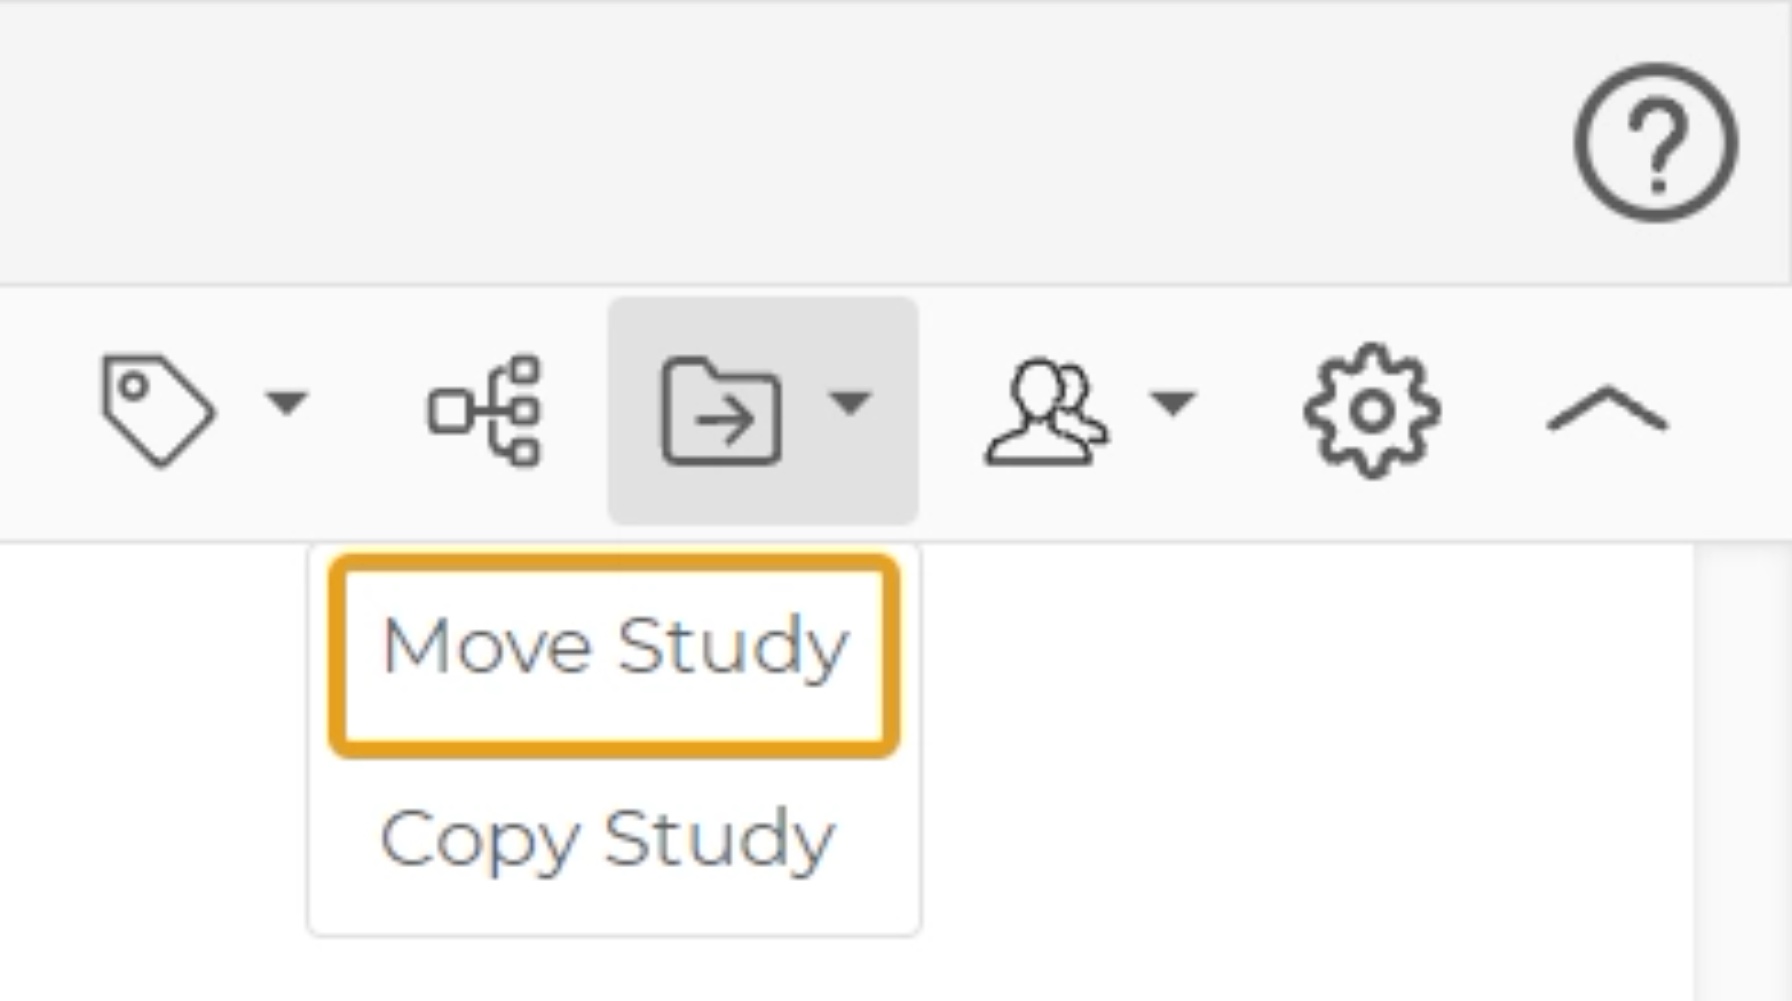 Select option "Move Study" from dropdown.